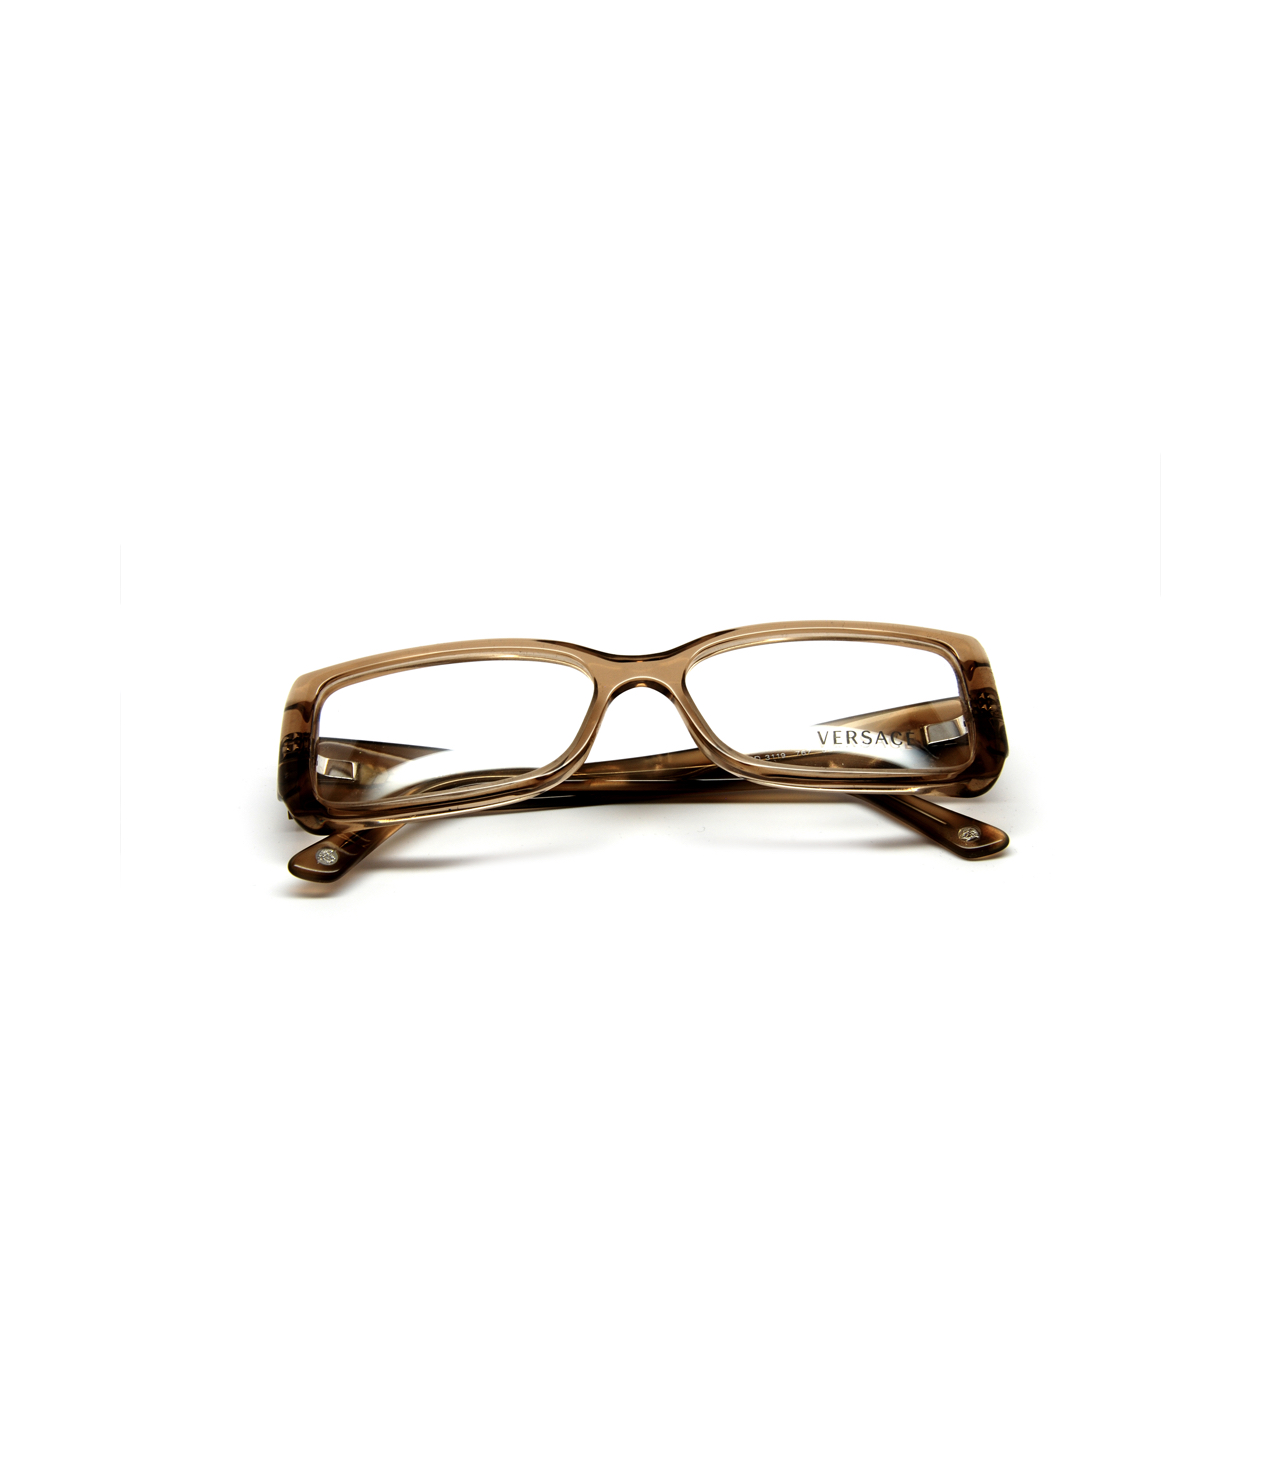 Product Photography of VERSACE glasses for Opti Online